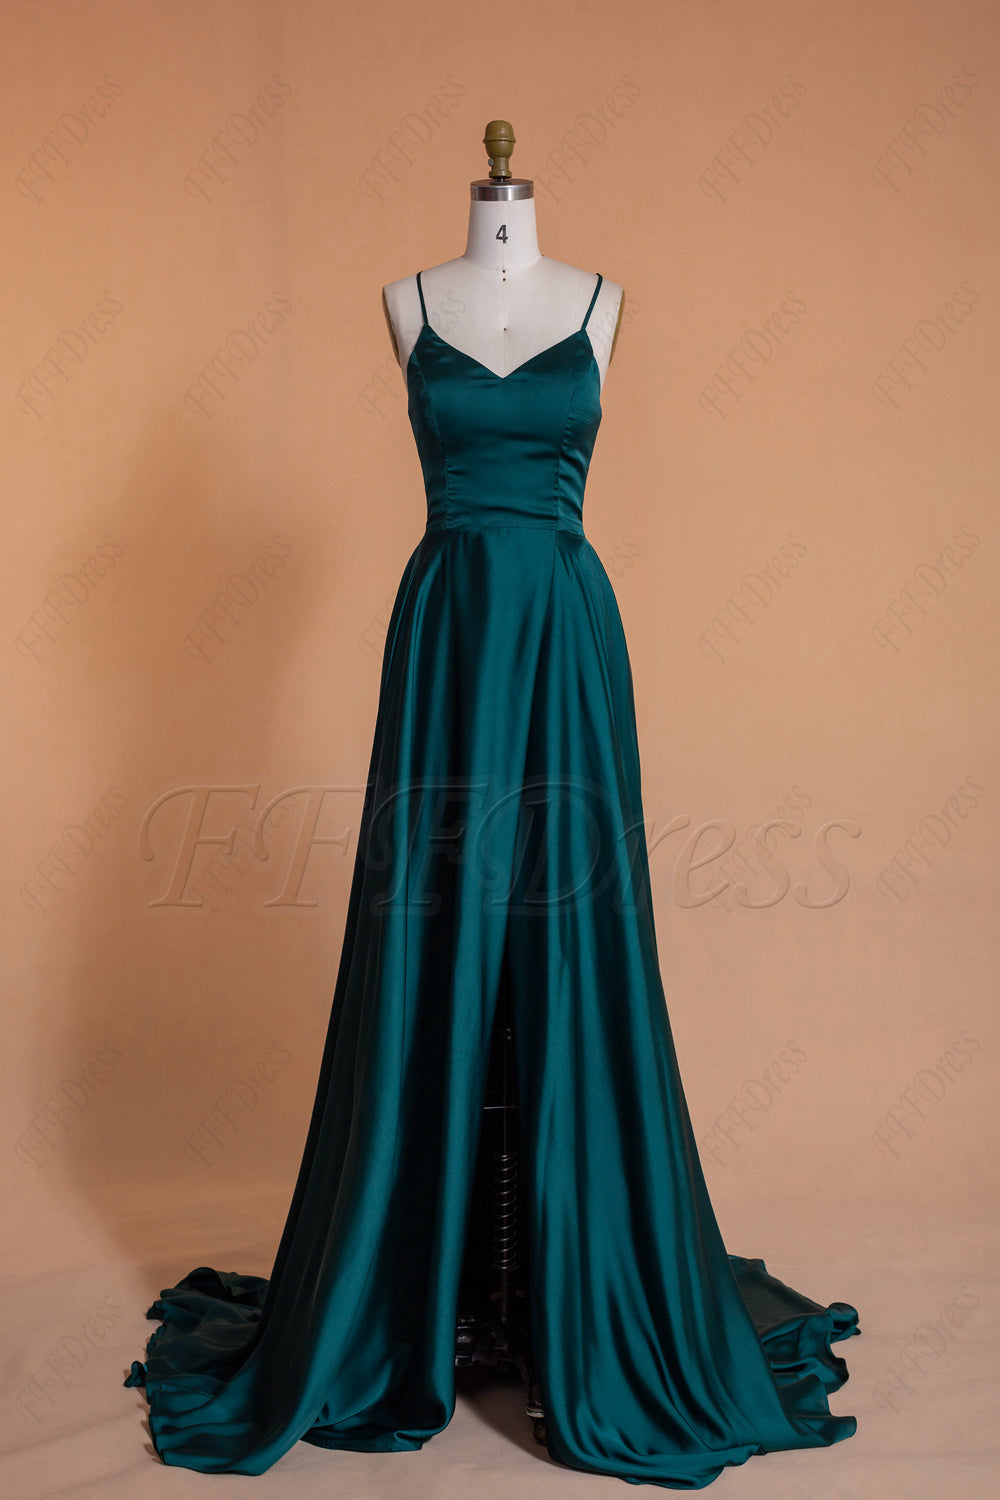 Dark green backless long prom dresses with slit